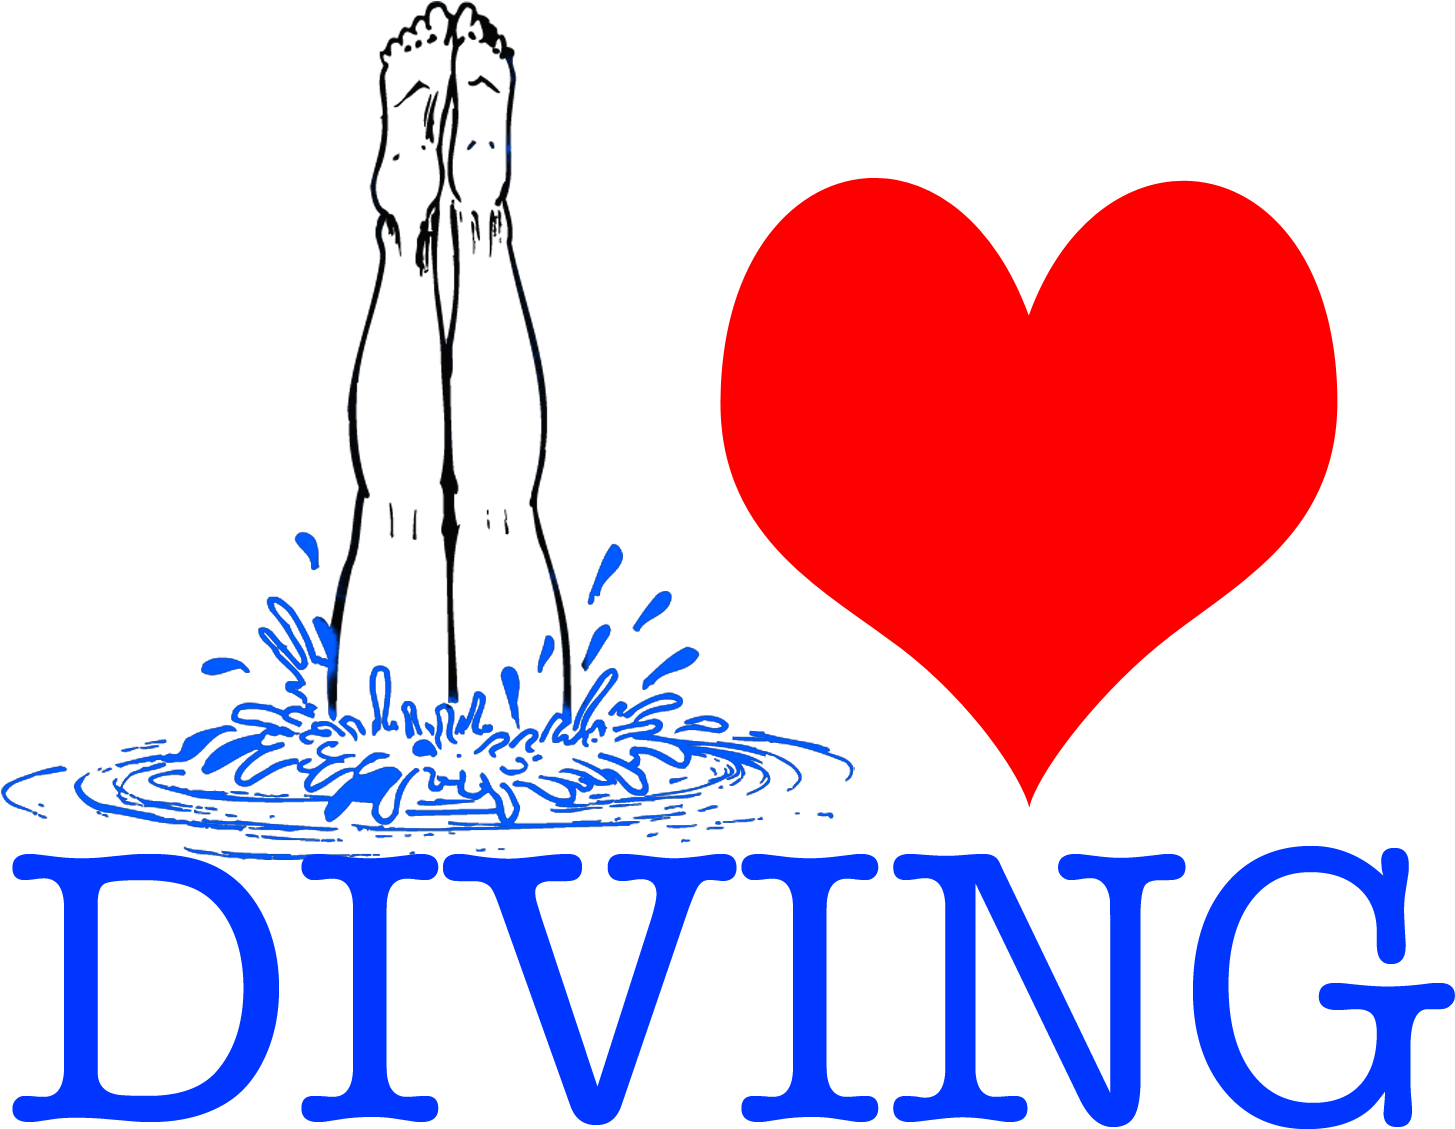 I Love To Dive Springboard Diving, That Is - Diving Picture Ornament (2000x2000)